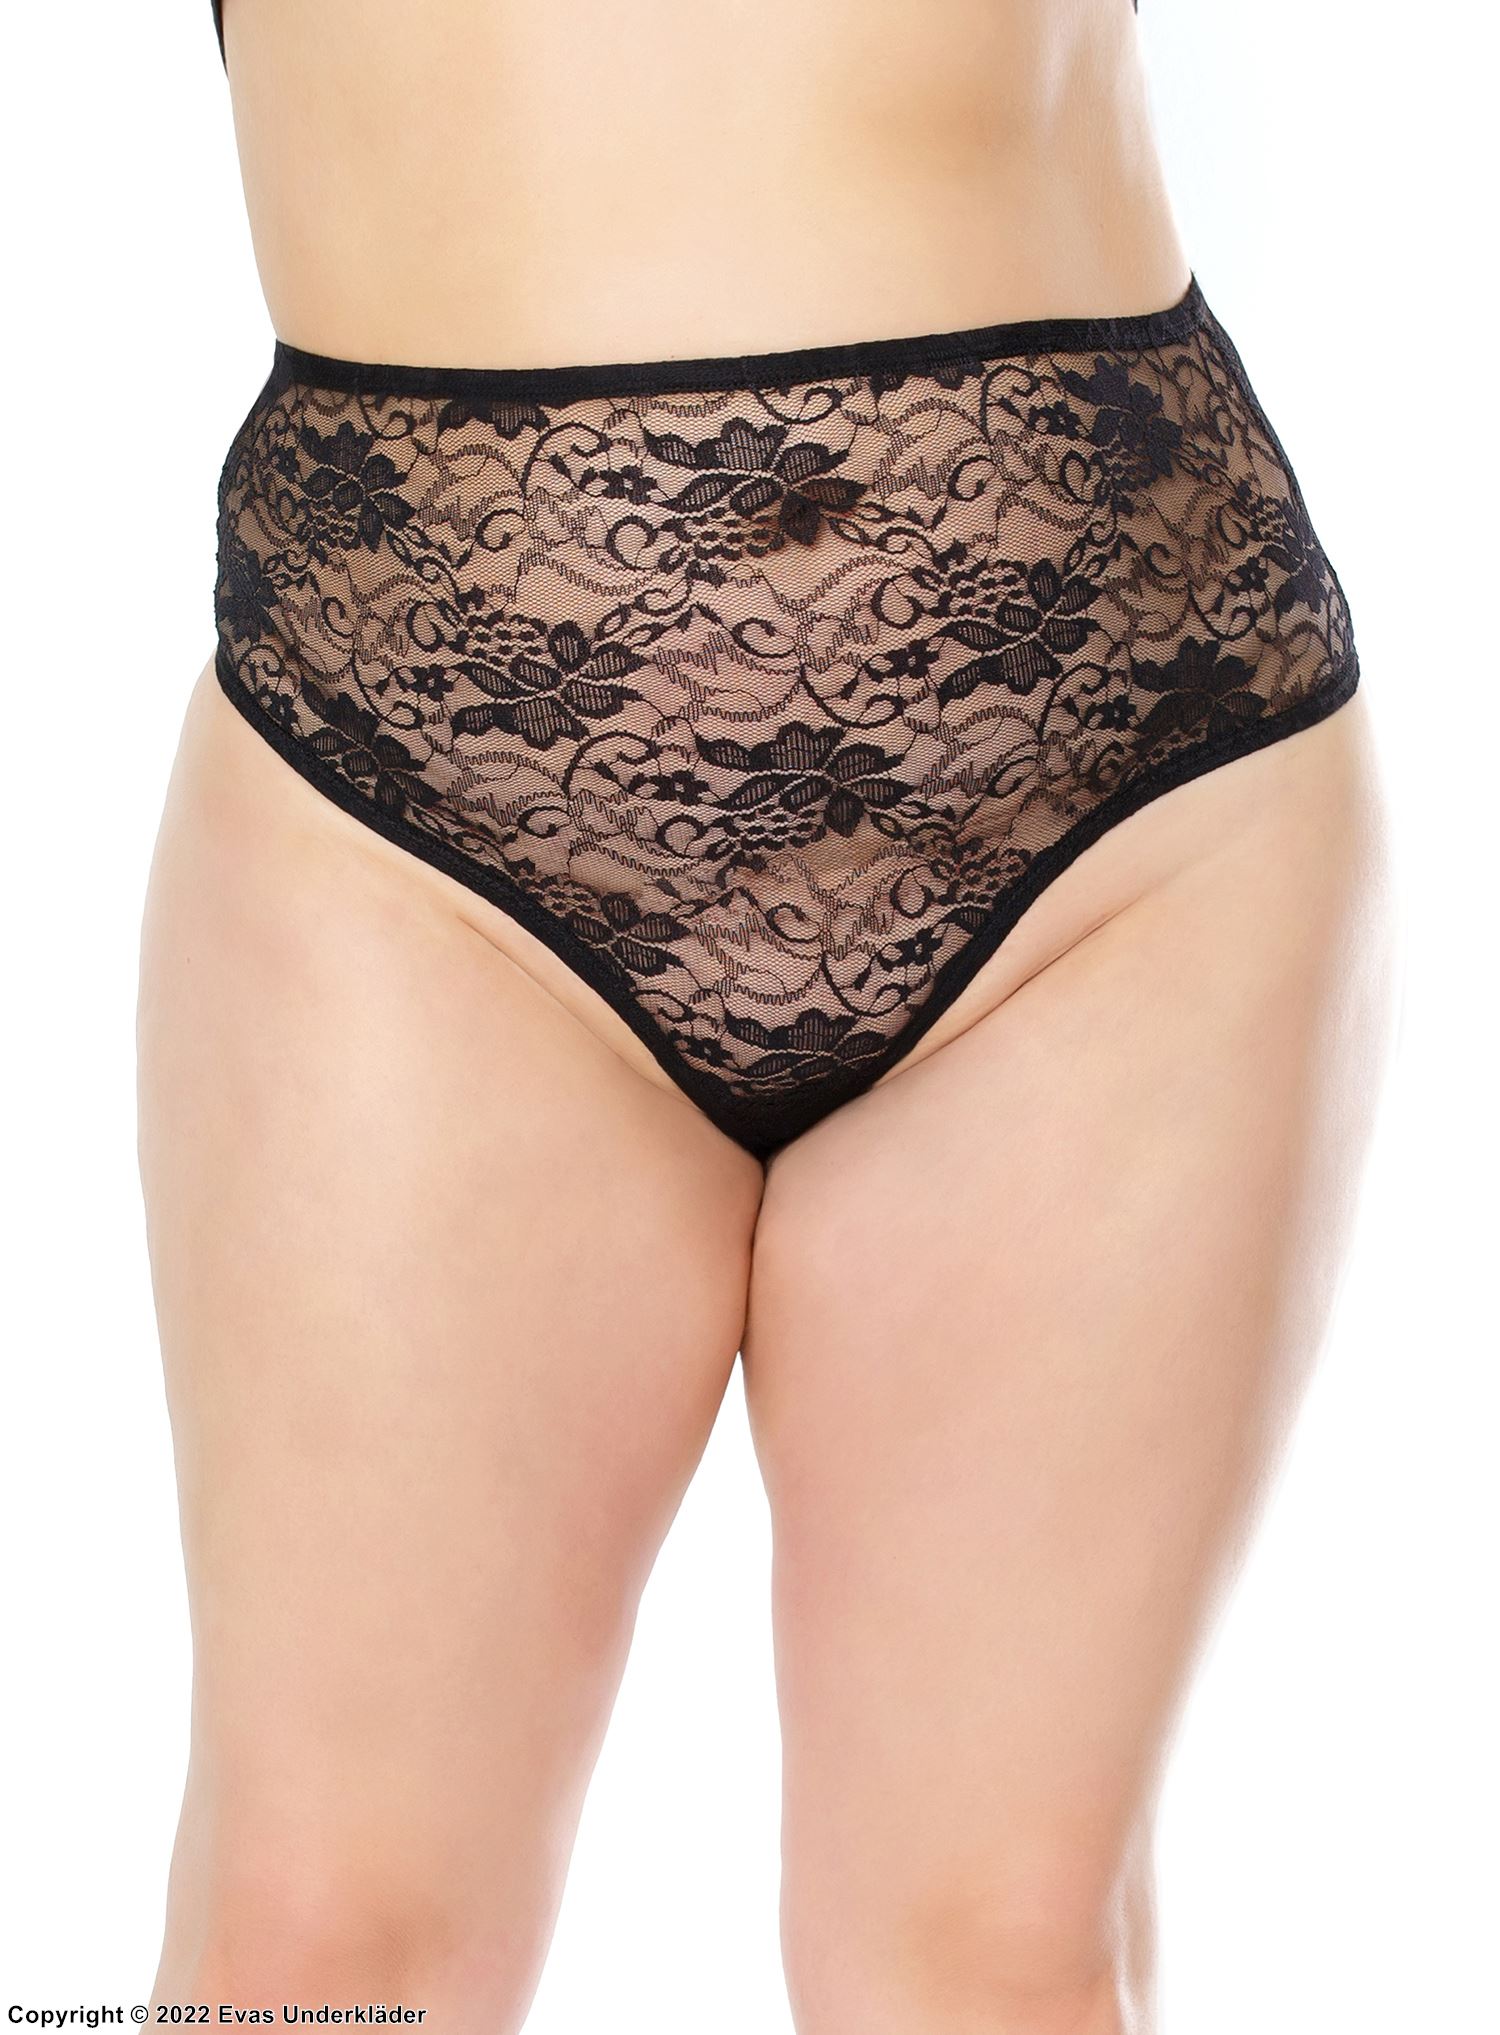 Classic thong, stretch lace, high waist, flowers, plus size